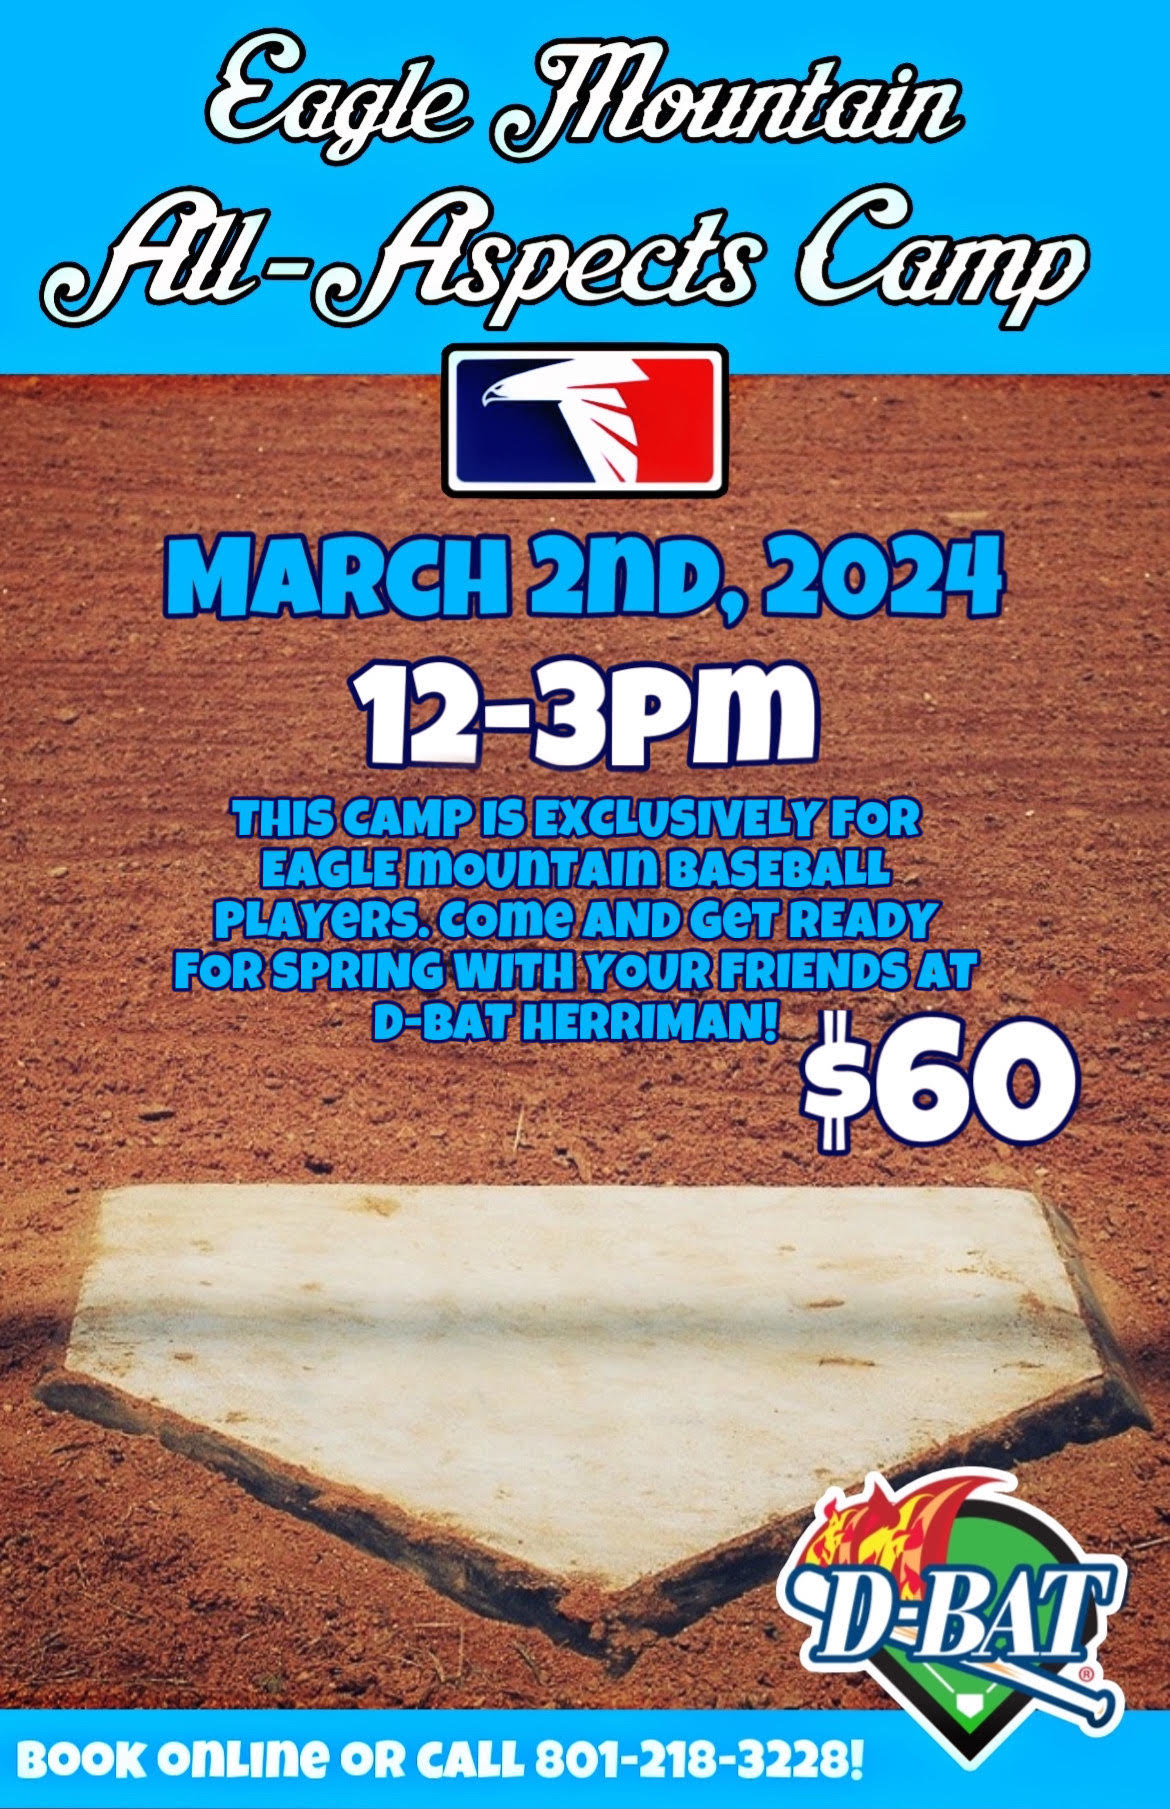 DBat Herriman is offering a baseball camp JUST FOR EAGLE MOUNTAIN BASEBALL players! Check it out....